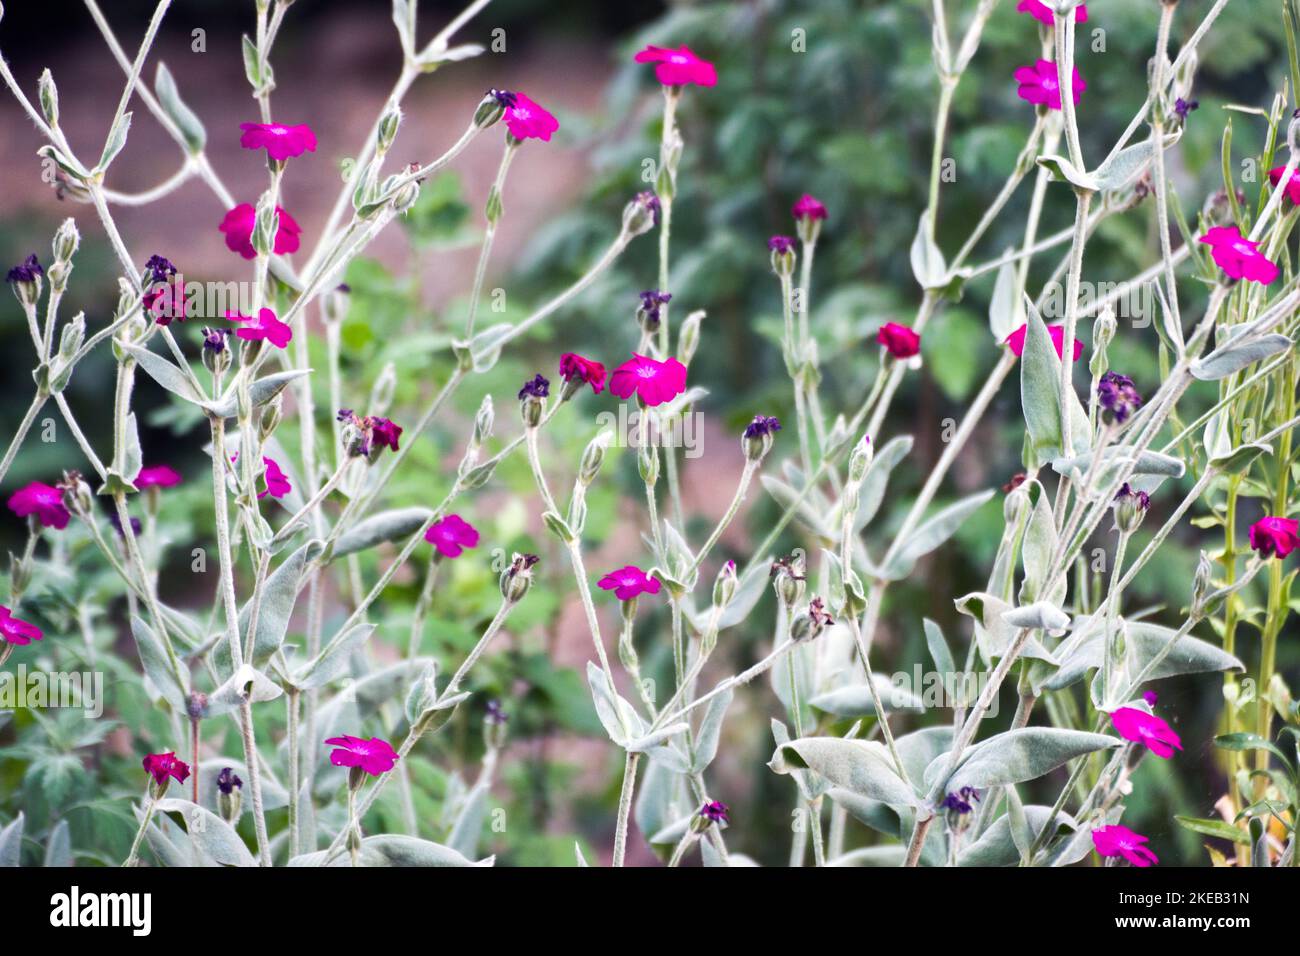 Silene coronaria. Common names include rose campion, dusty miller, mullein-pink, bloody William and lamp-flower, a plant of the daisy family. Stock Photo